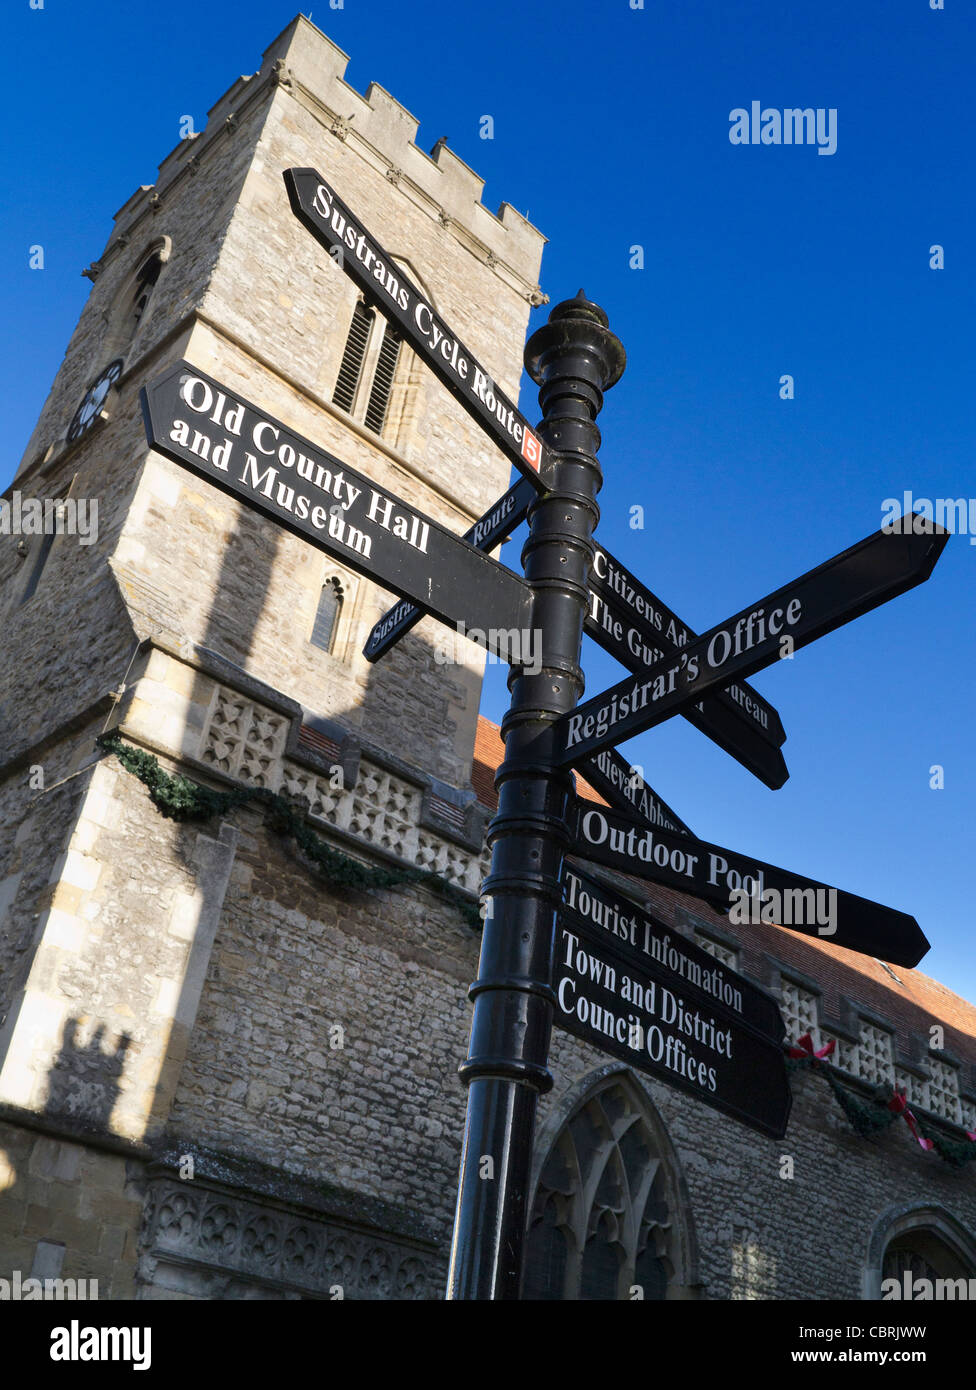 Landmark and directions sign, Abingdon-on-Thames Stock Photo